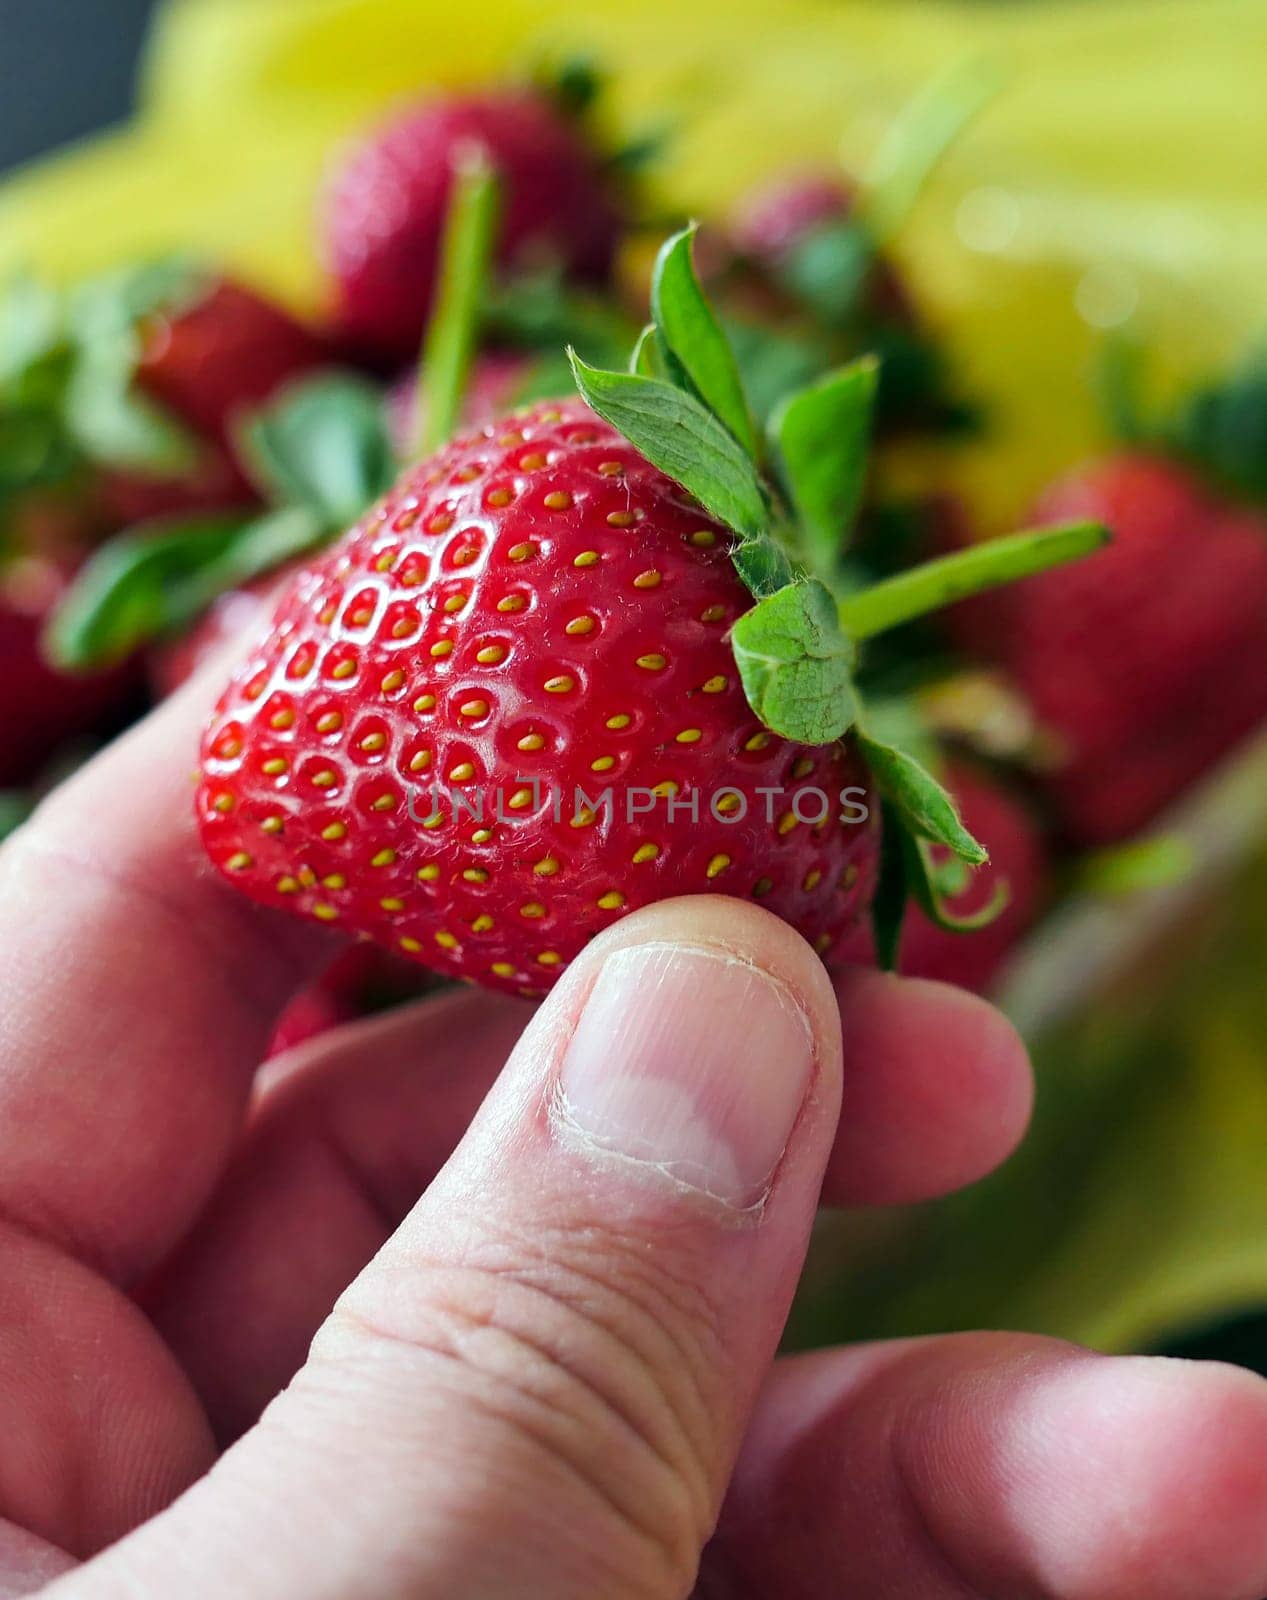 children's favorite fruit is strawberry, a bowl of natural strawberries, by nhatipoglu